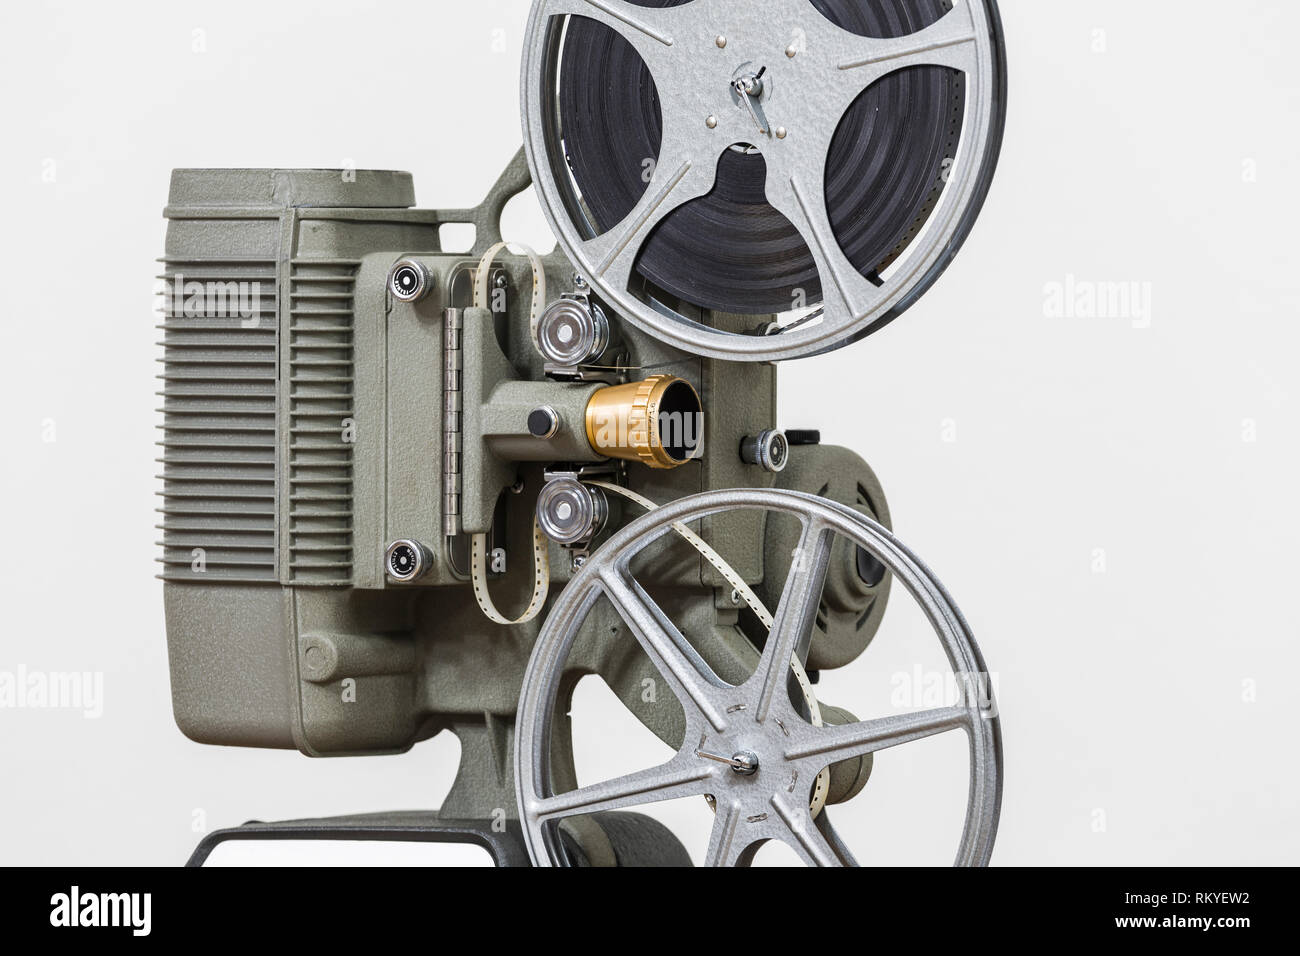 https://c8.alamy.com/comp/RKYEW2/vintage-8mm-home-film-movie-projector-with-white-background-RKYEW2.jpg